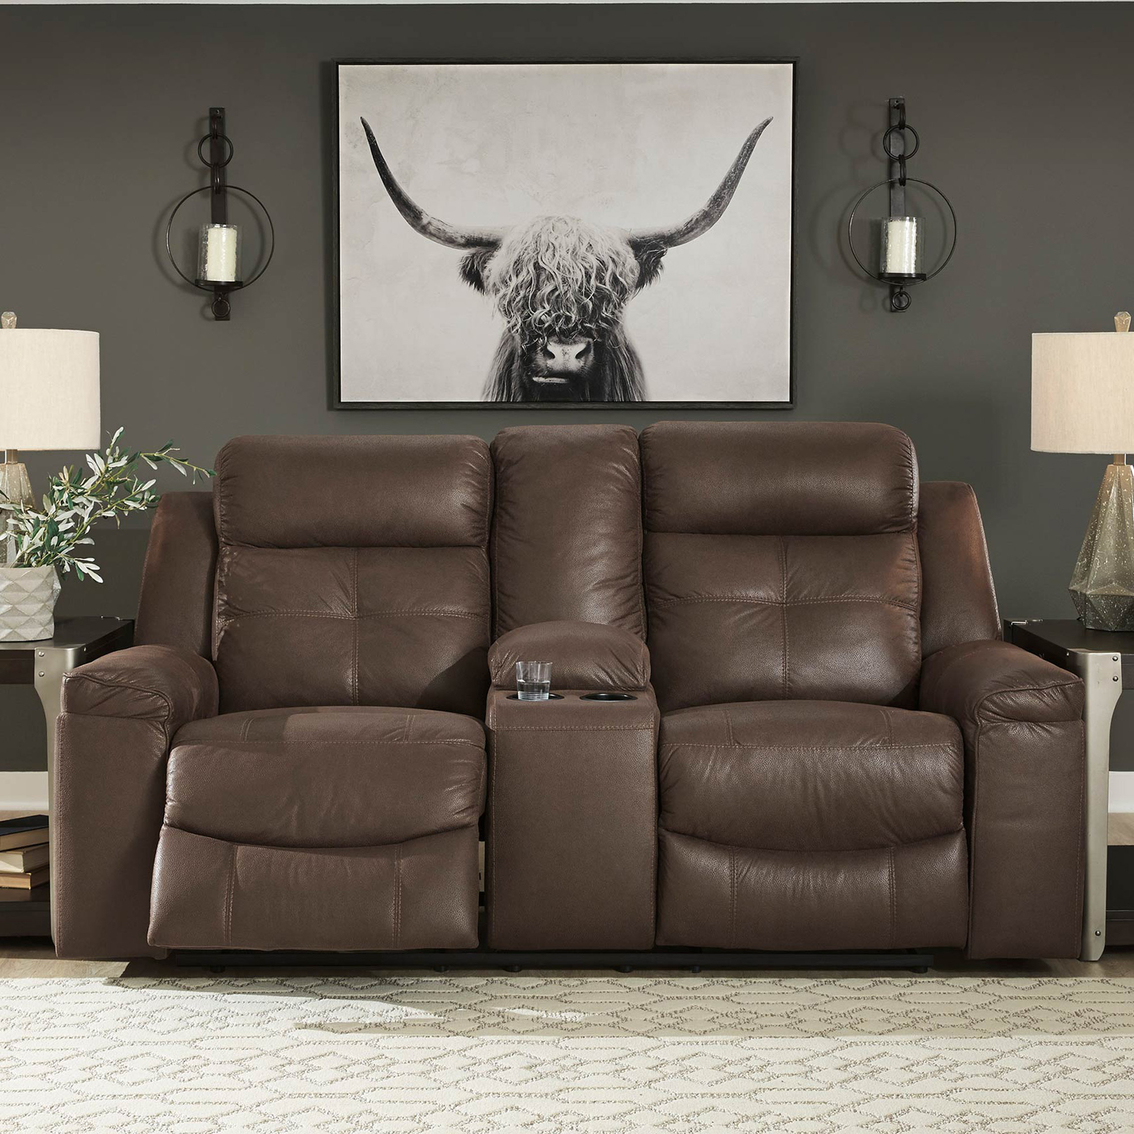 Signature Design by Ashley Jesolo Double Reclining Loveseat with Console - Image 2 of 4